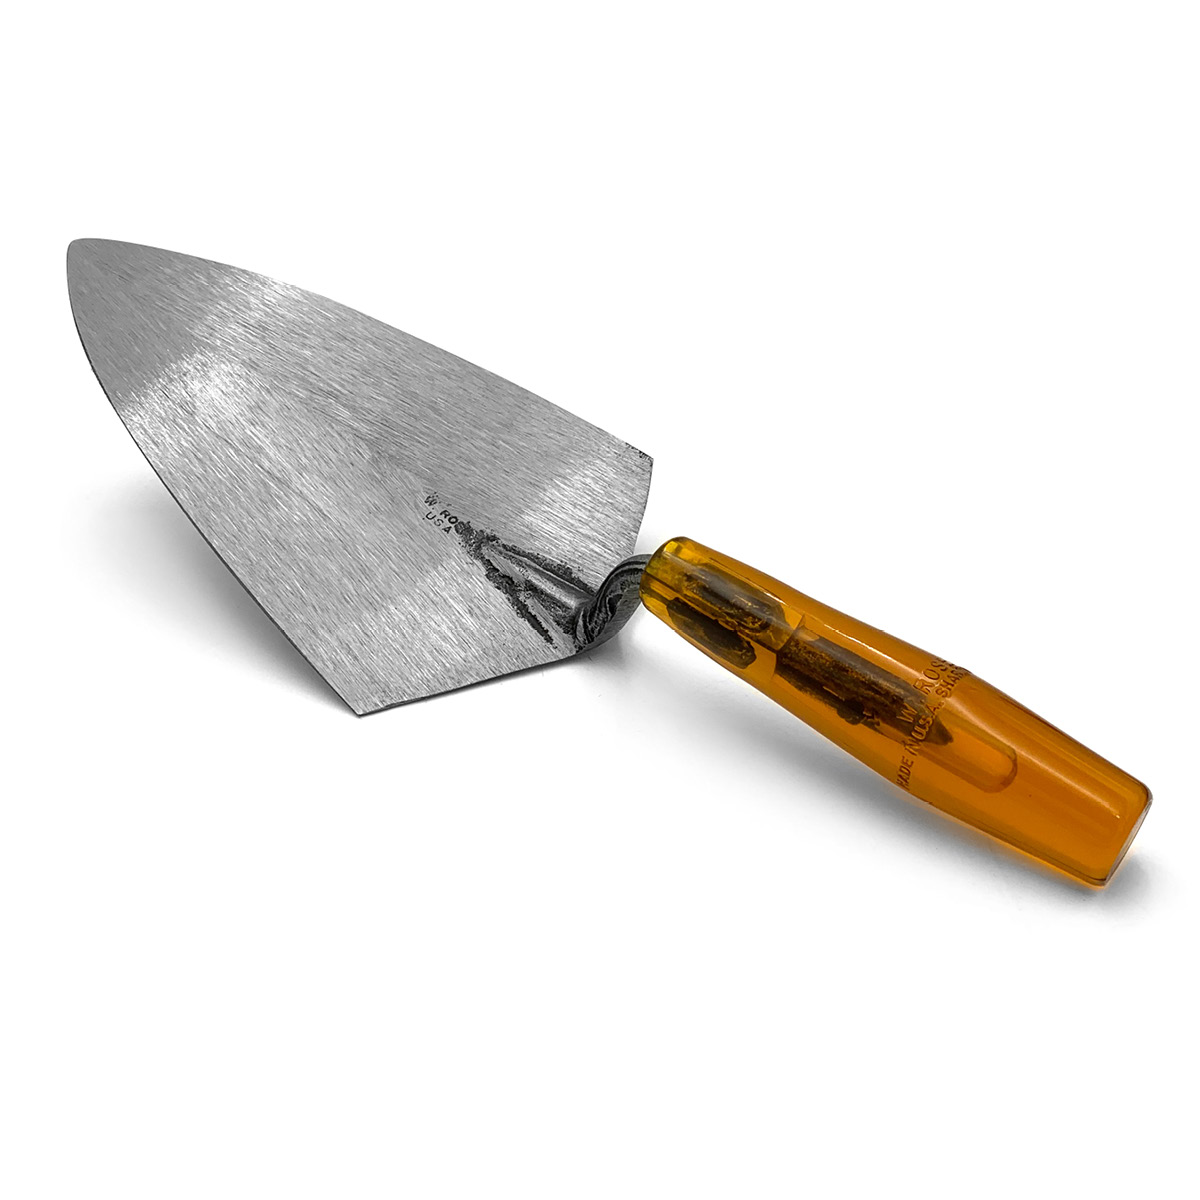 W.rose Trowels made from a single piece of specially forged steel for extra strength. These American made trowels can be purchased in the United Kingdom via Speedcrete who sell masonry professional tools. Philadelphia Plastic handle brick trowel.